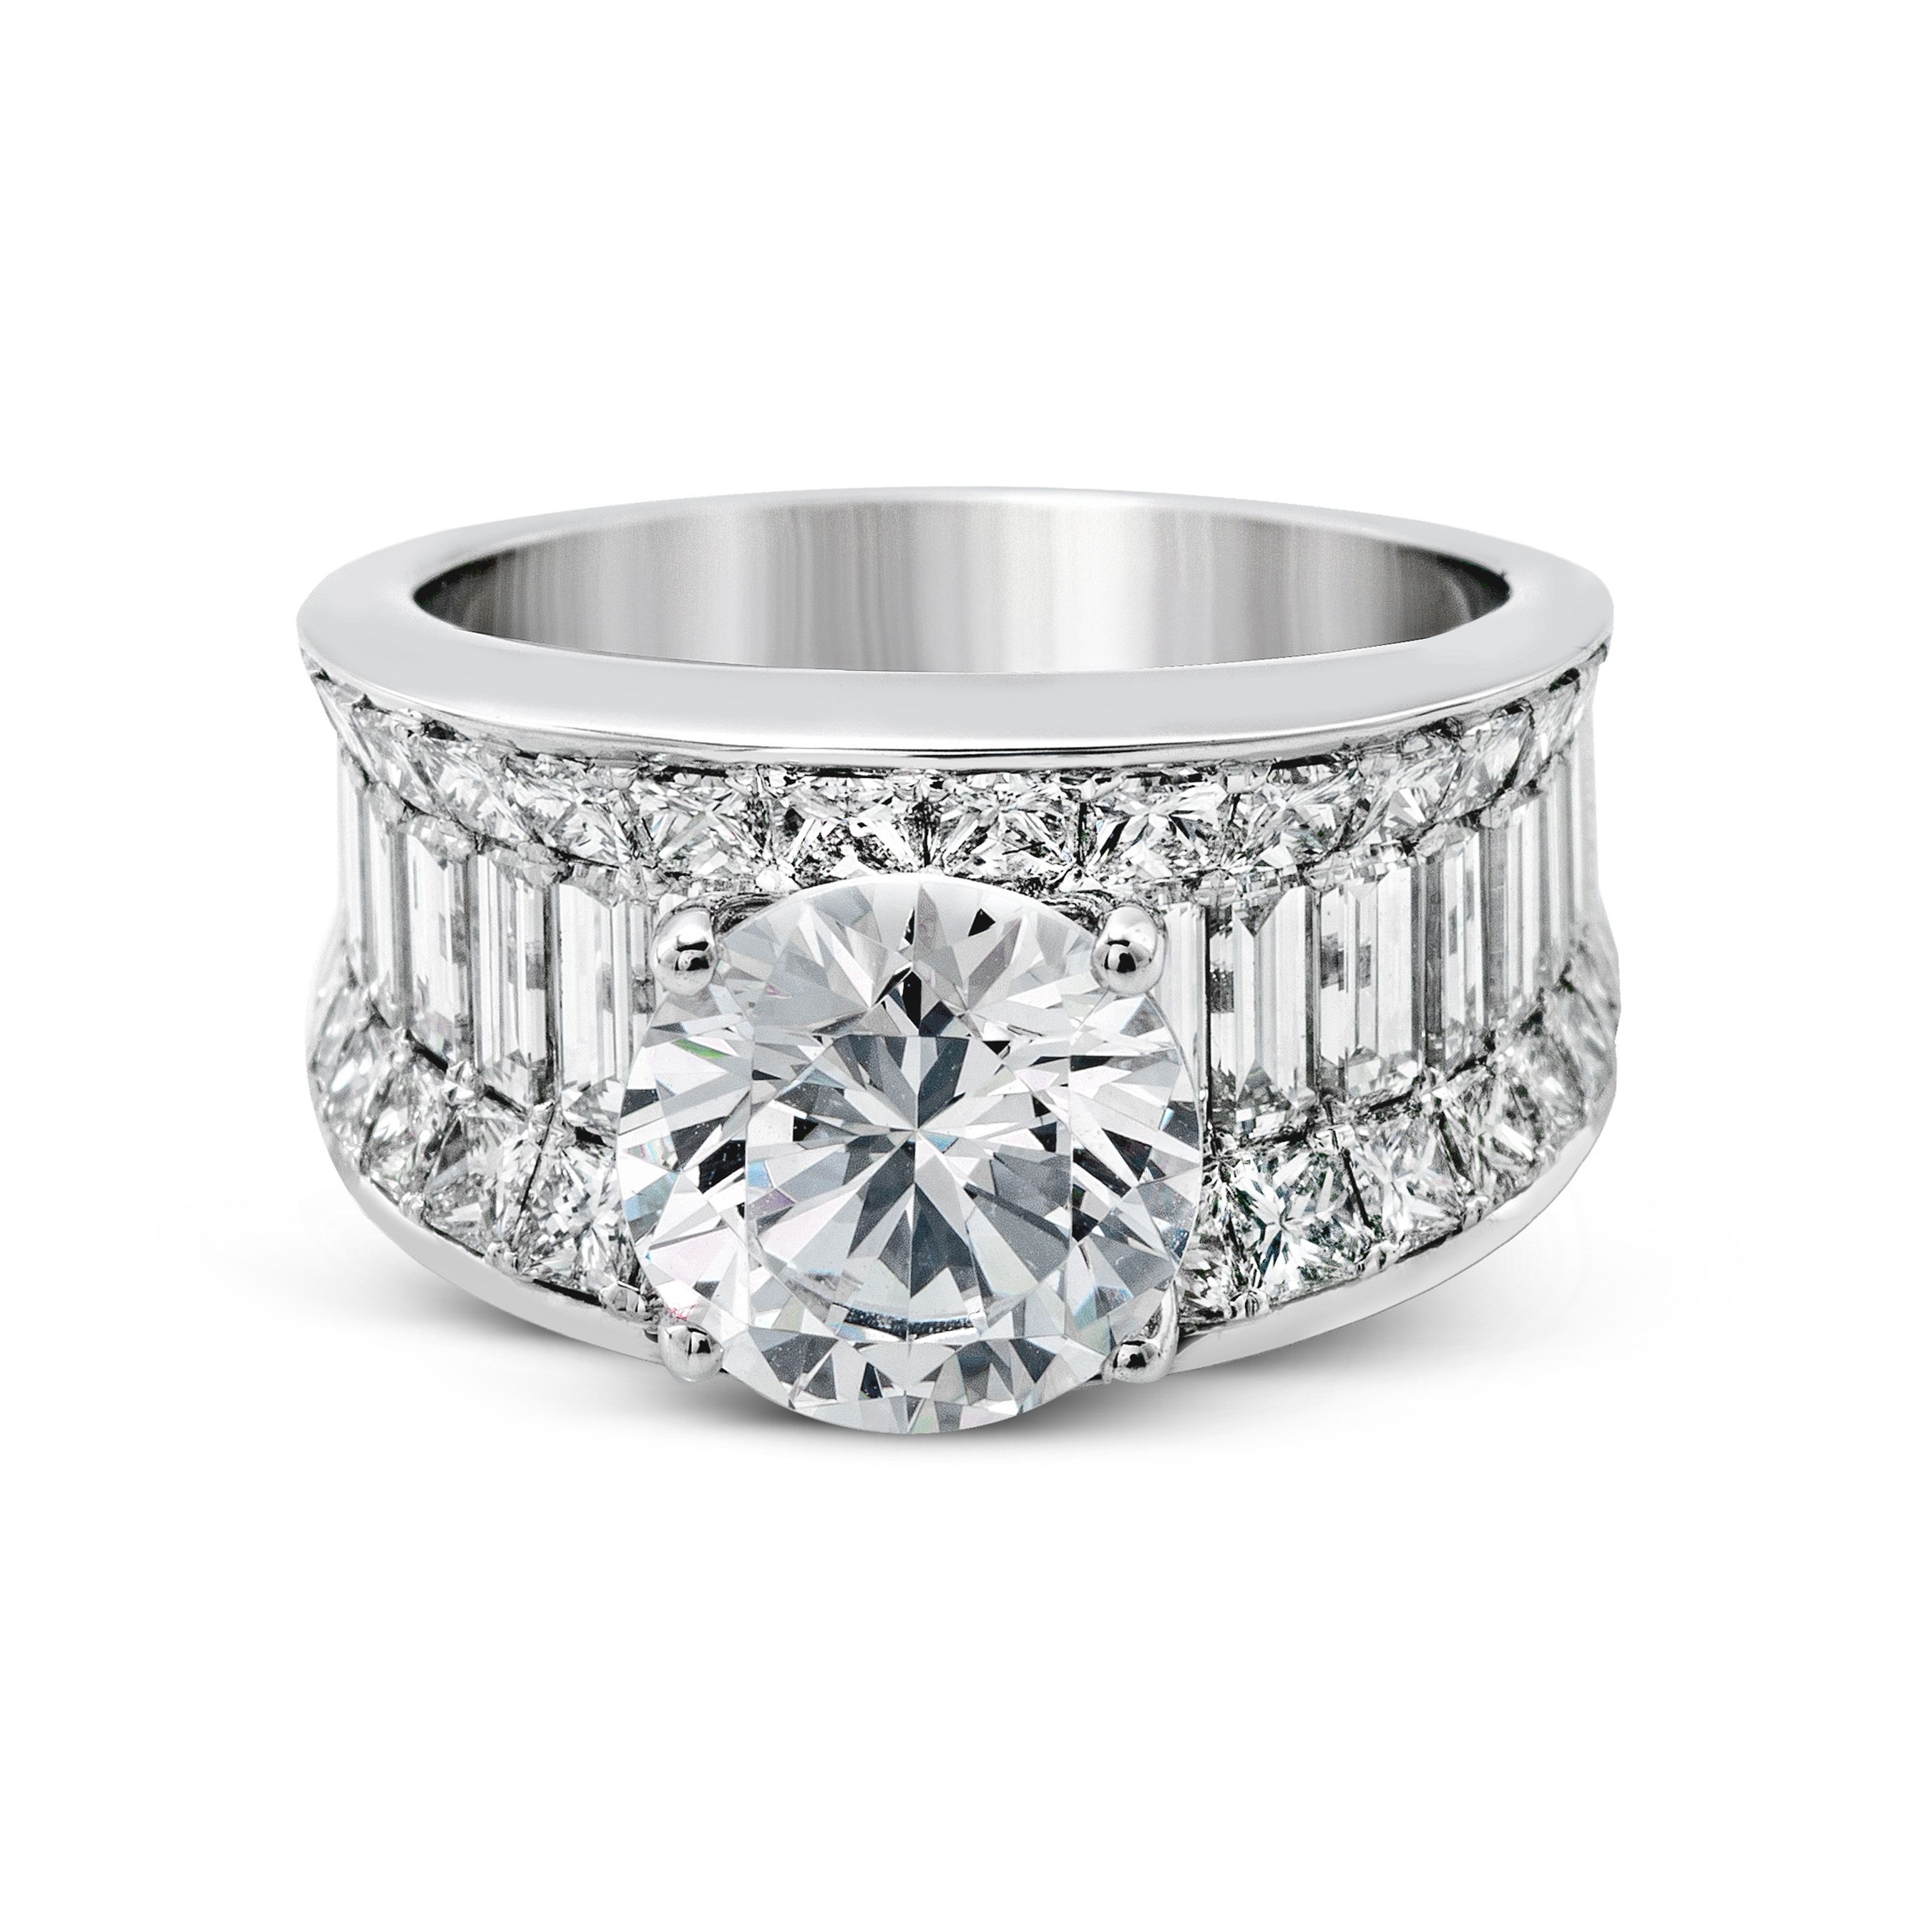 MR1922 Nocturnal Sophistication Collection Platinum Round Cut Engagement Ring